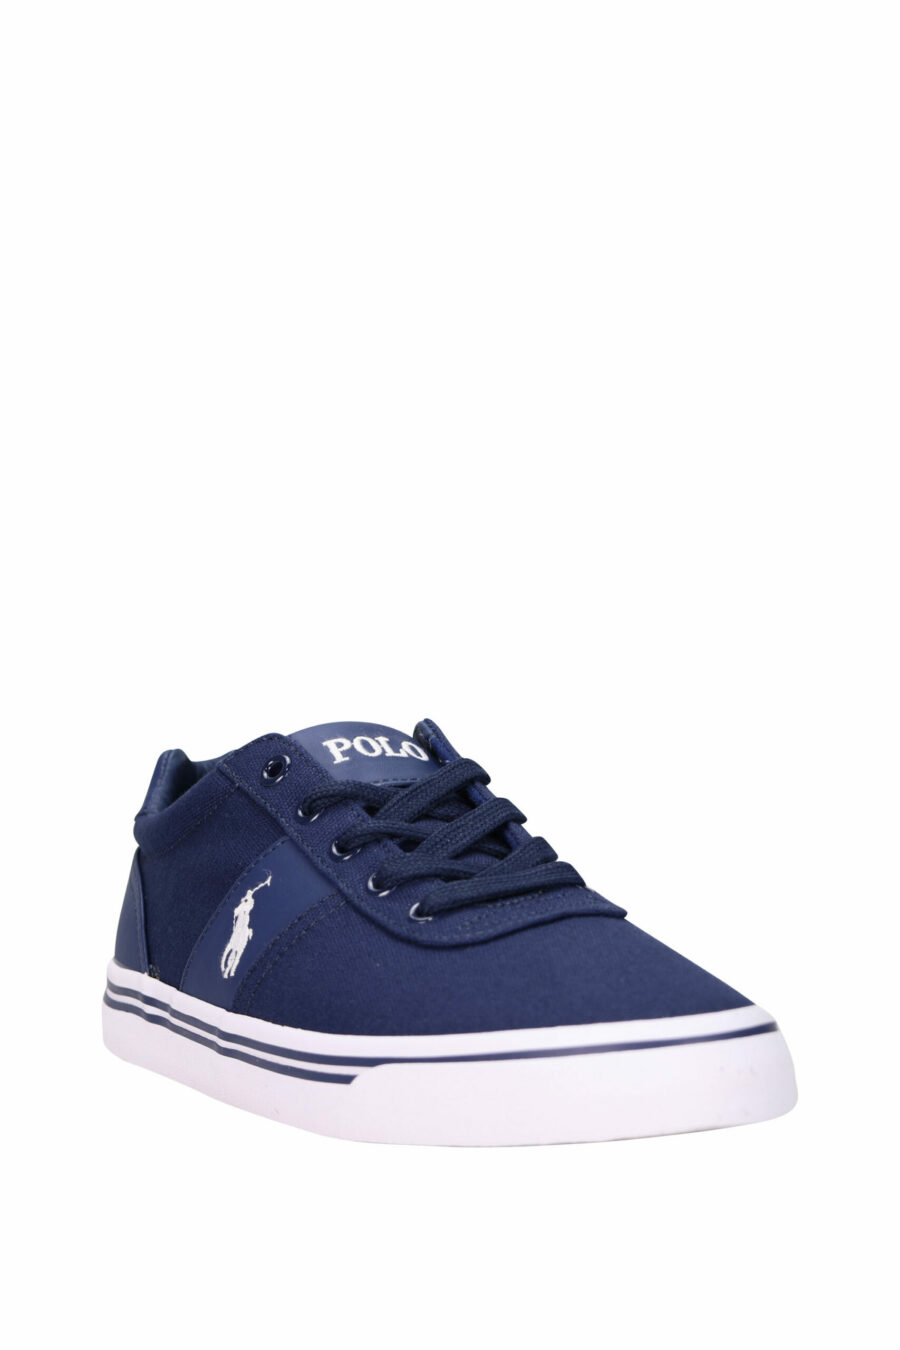 Dark blue trainers with mini-logo "polo" and white sole - 3611588439341 1 scaled